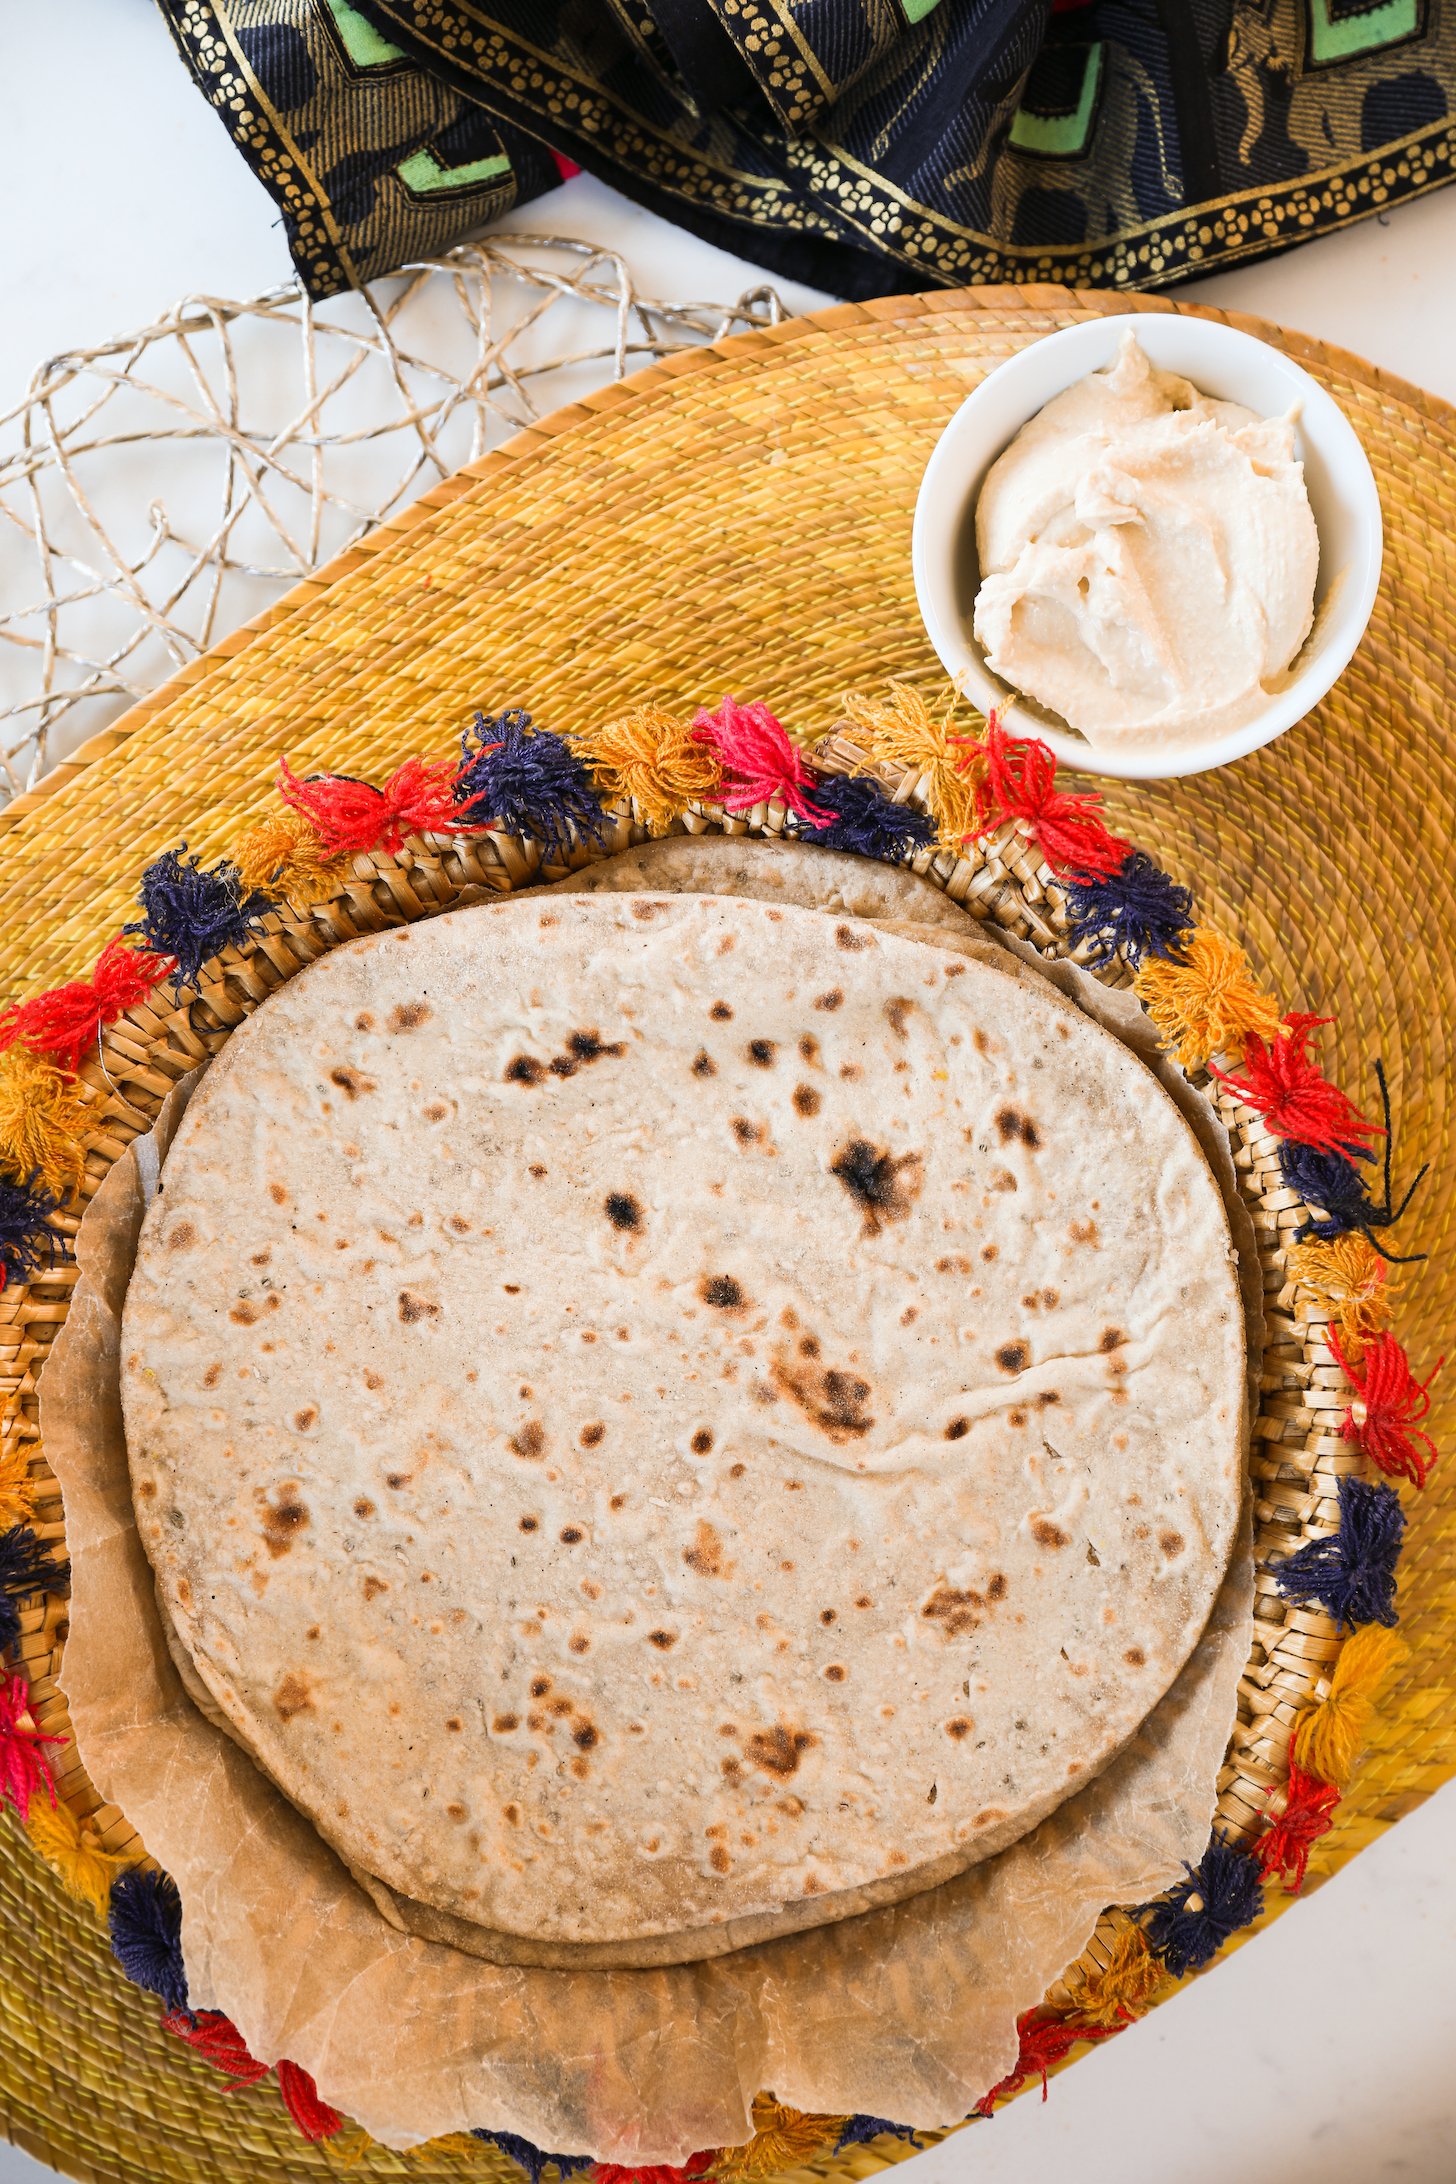 An overview of a stack of soft Rotis accompanied by a ramekin of creamy hummus.